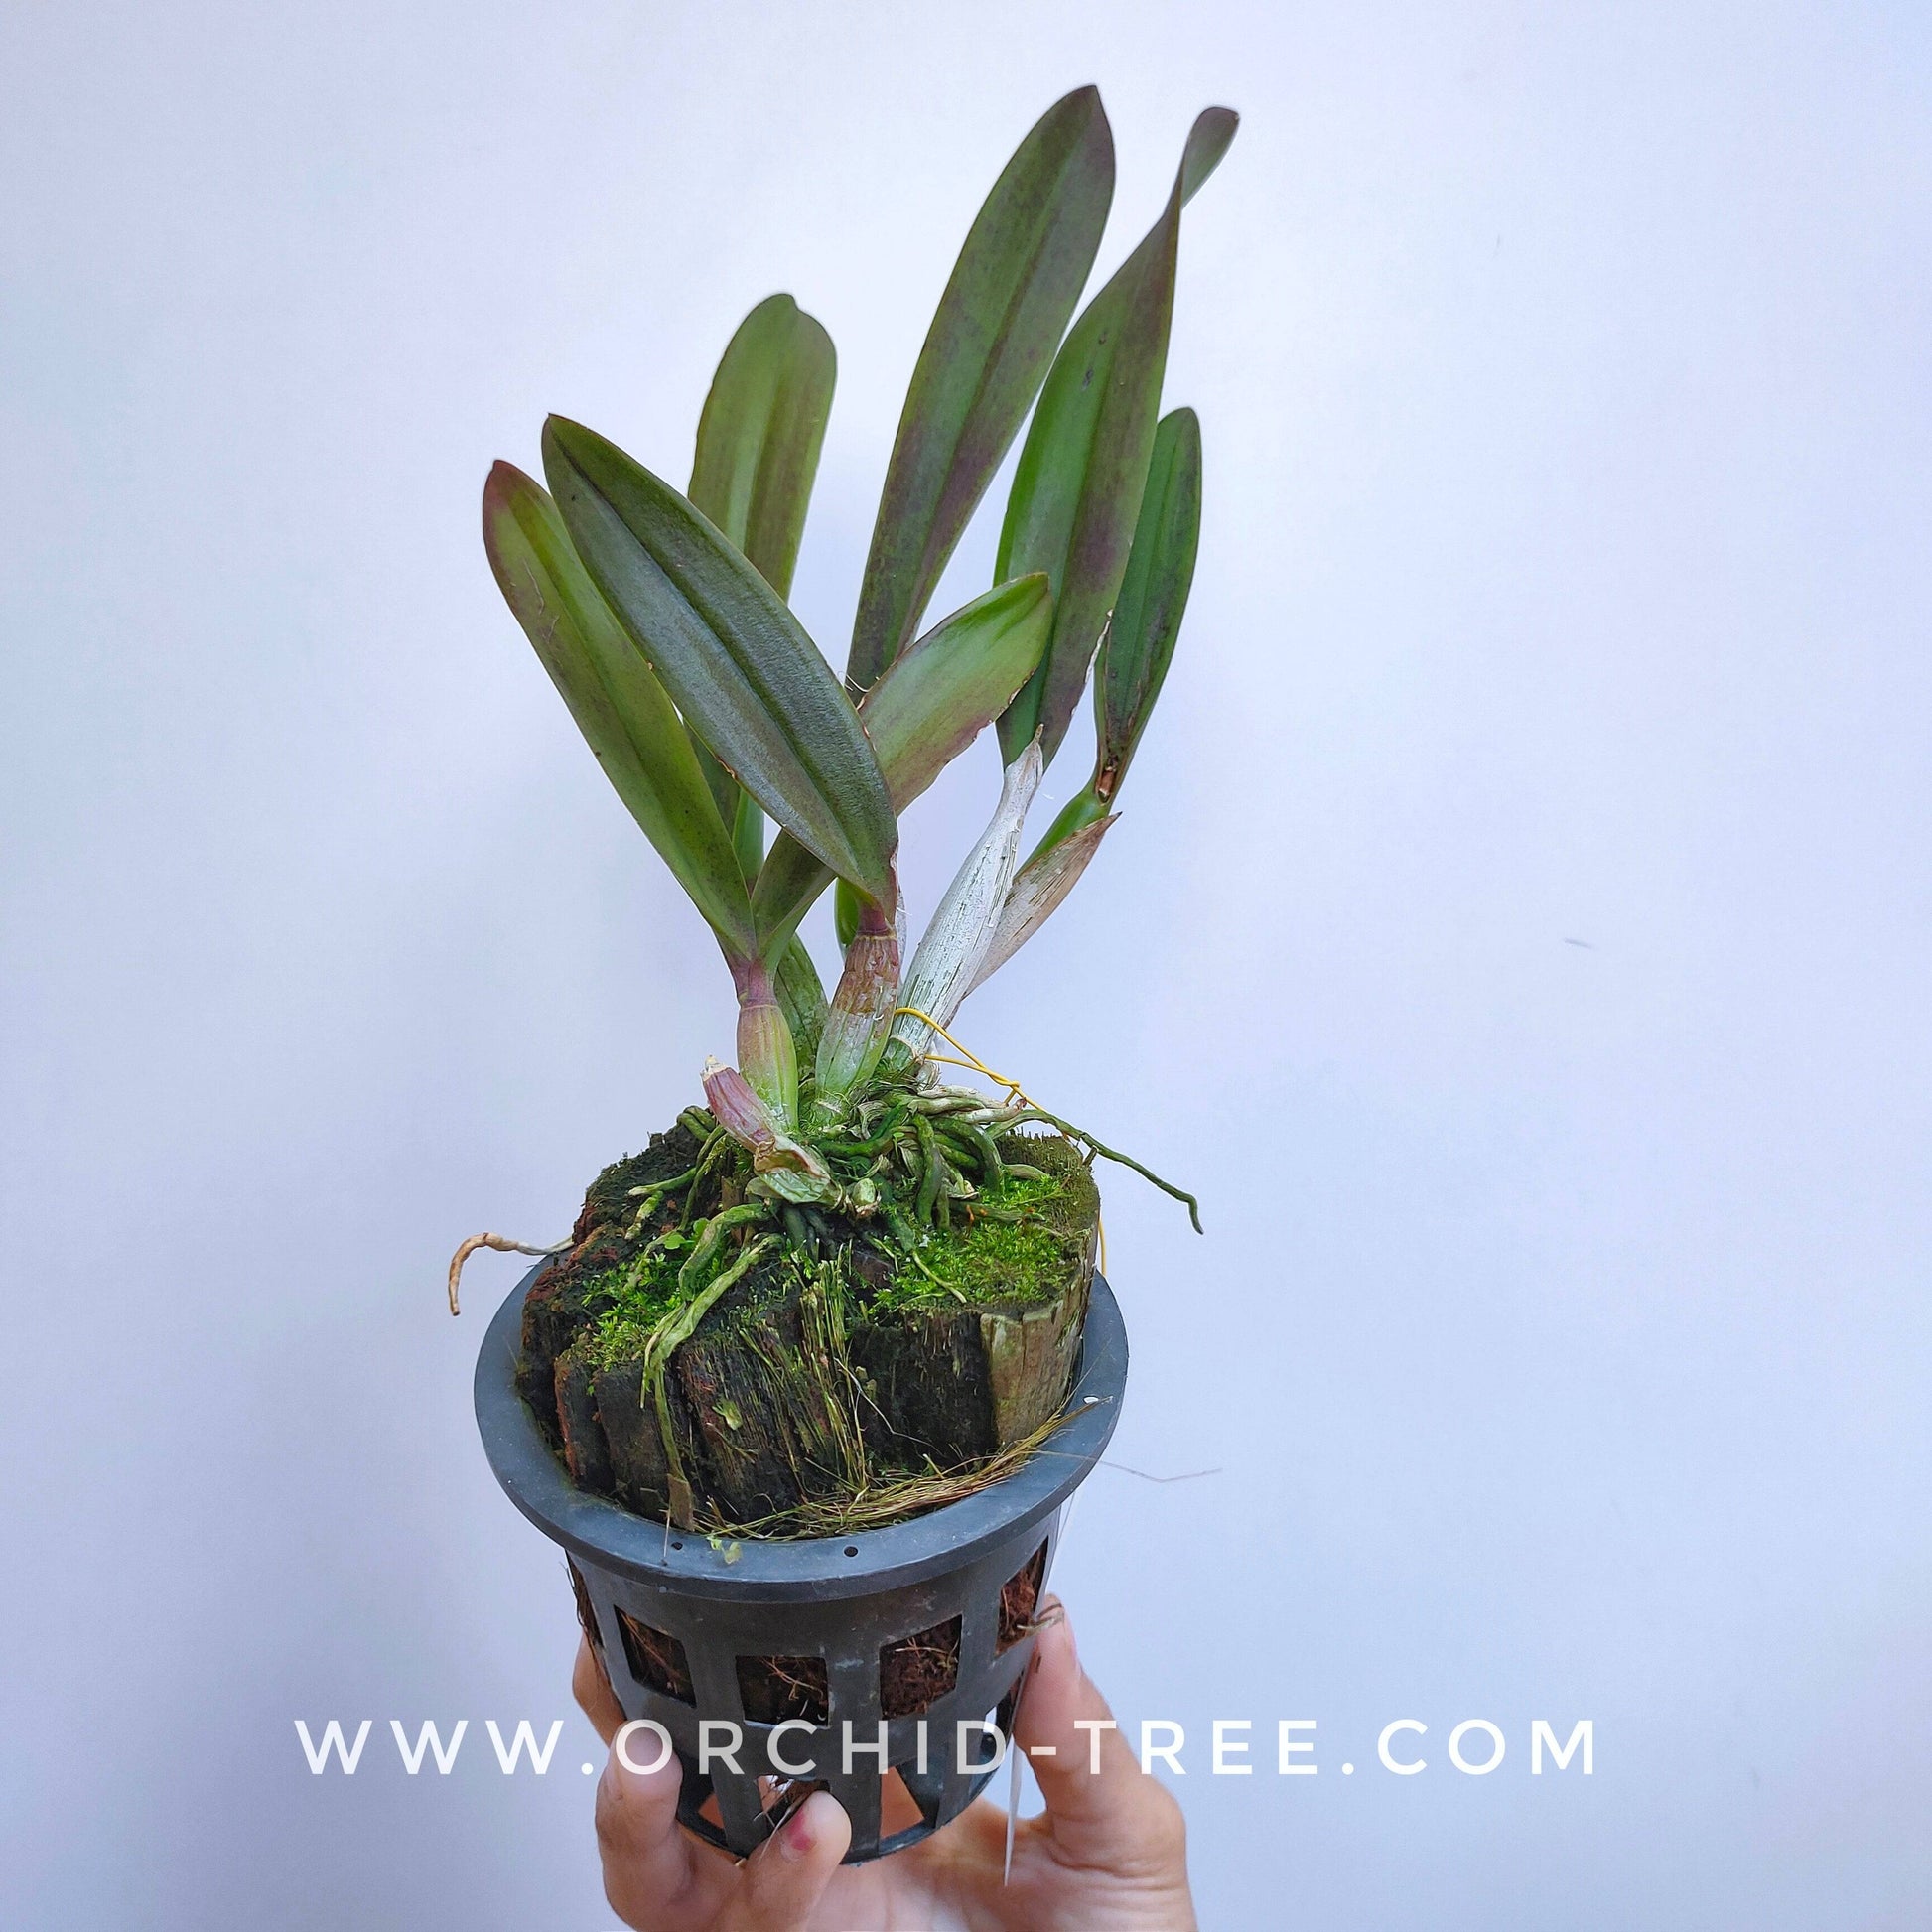 Encyleyvola Grapelade - Without Flowers | BS - Buy Orchids Plants Online by Orchid-Tree.com